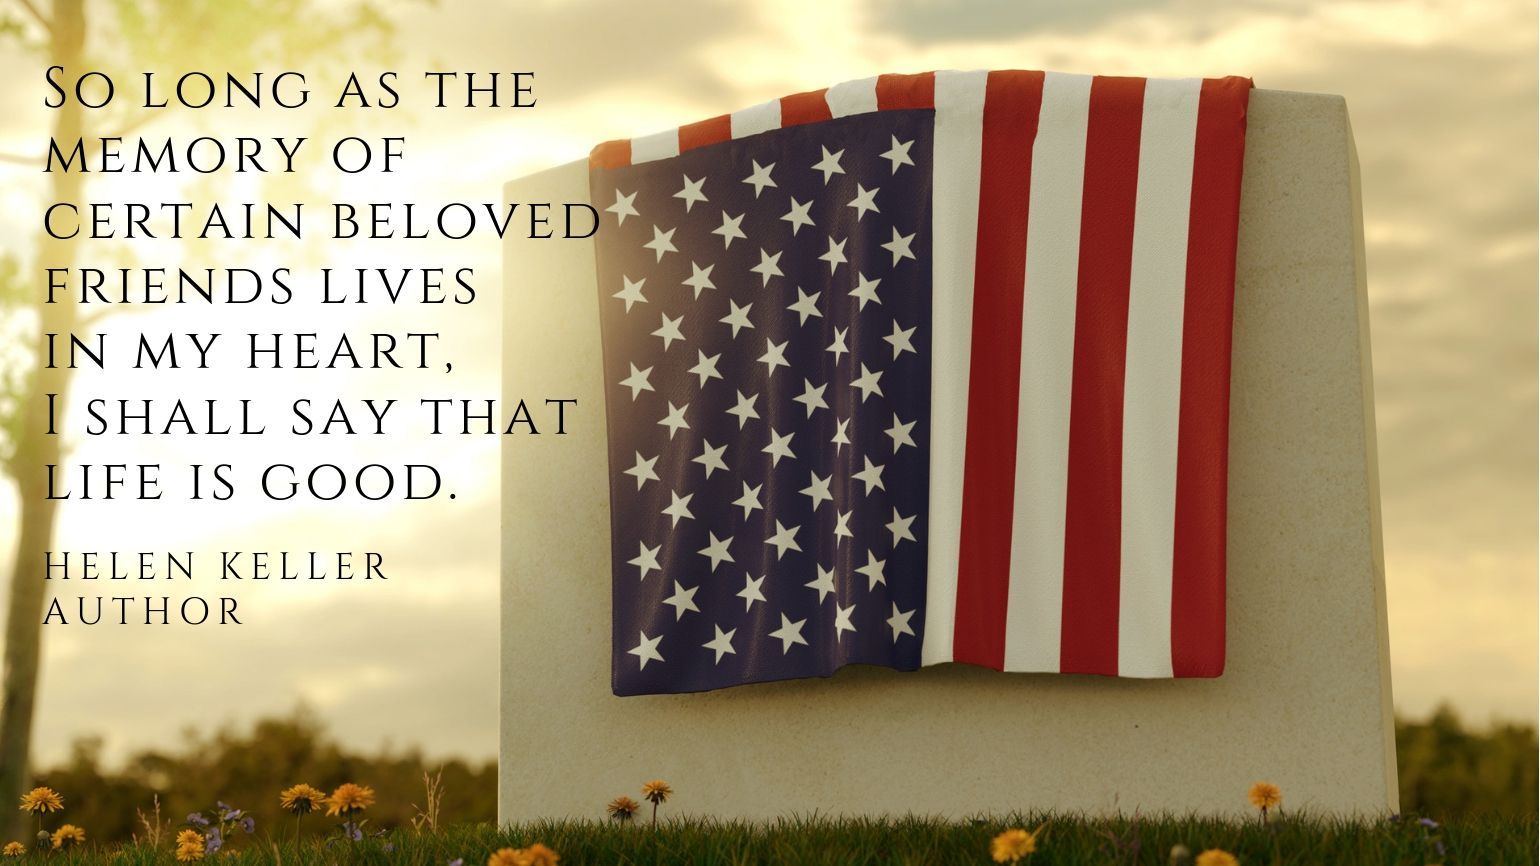 10 Memorial Day Quotes That Honor America's Fallen Heroes - Guideposts